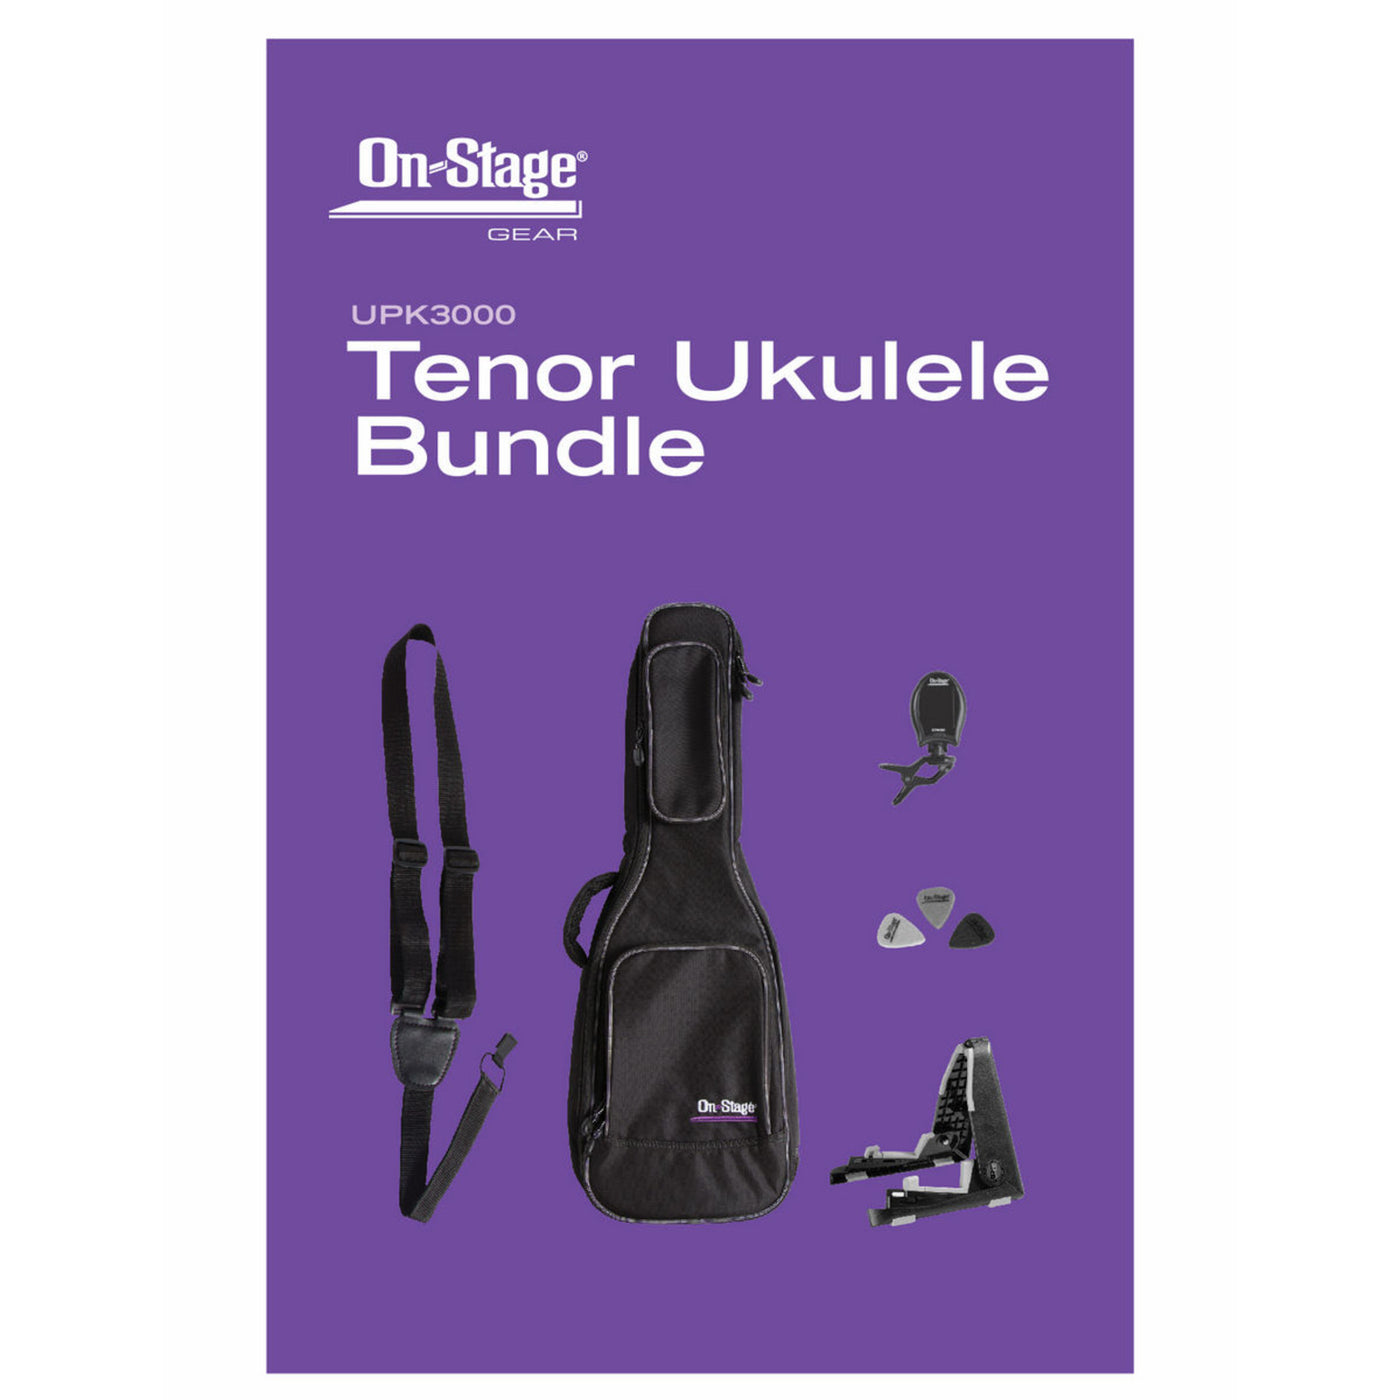 On-Stage Tenor Ukulele Bundle with Gig Bag, Stand, Tuner, and Accessories  (UPK3000)